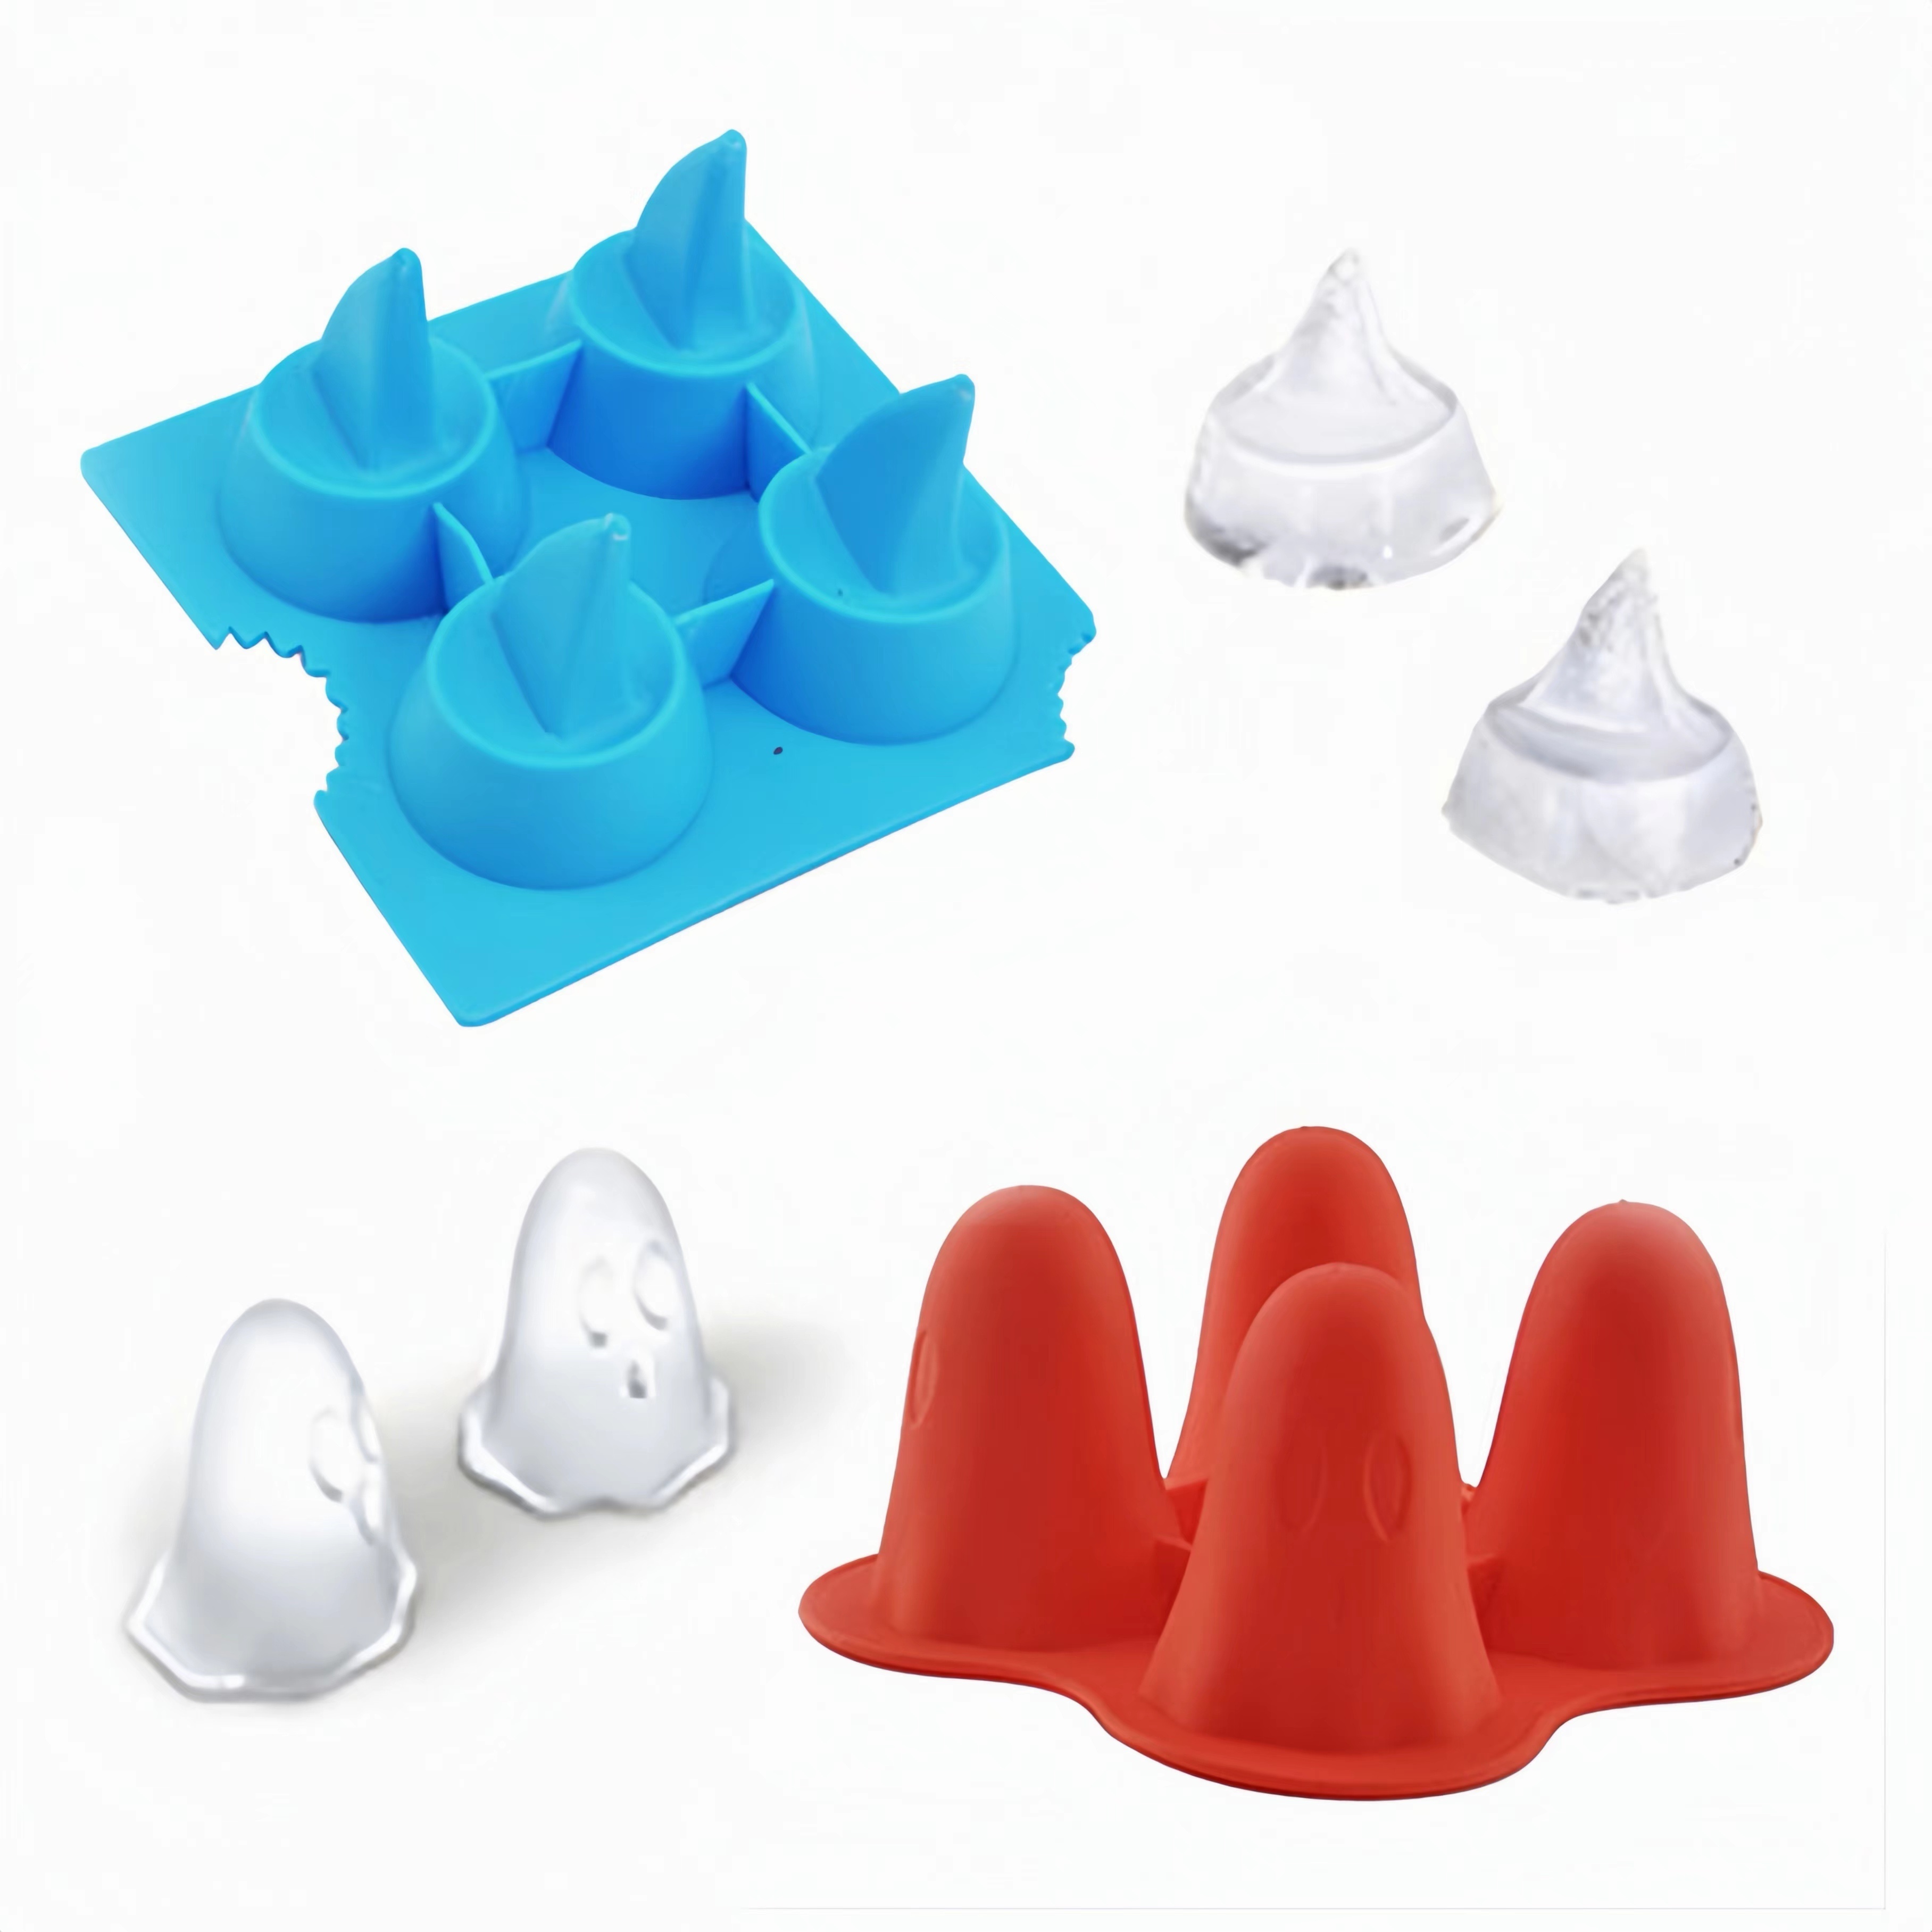 EXQUIMEUBLE 4pcs Ghost Ice Tray Halloween Decor Silicone Tray